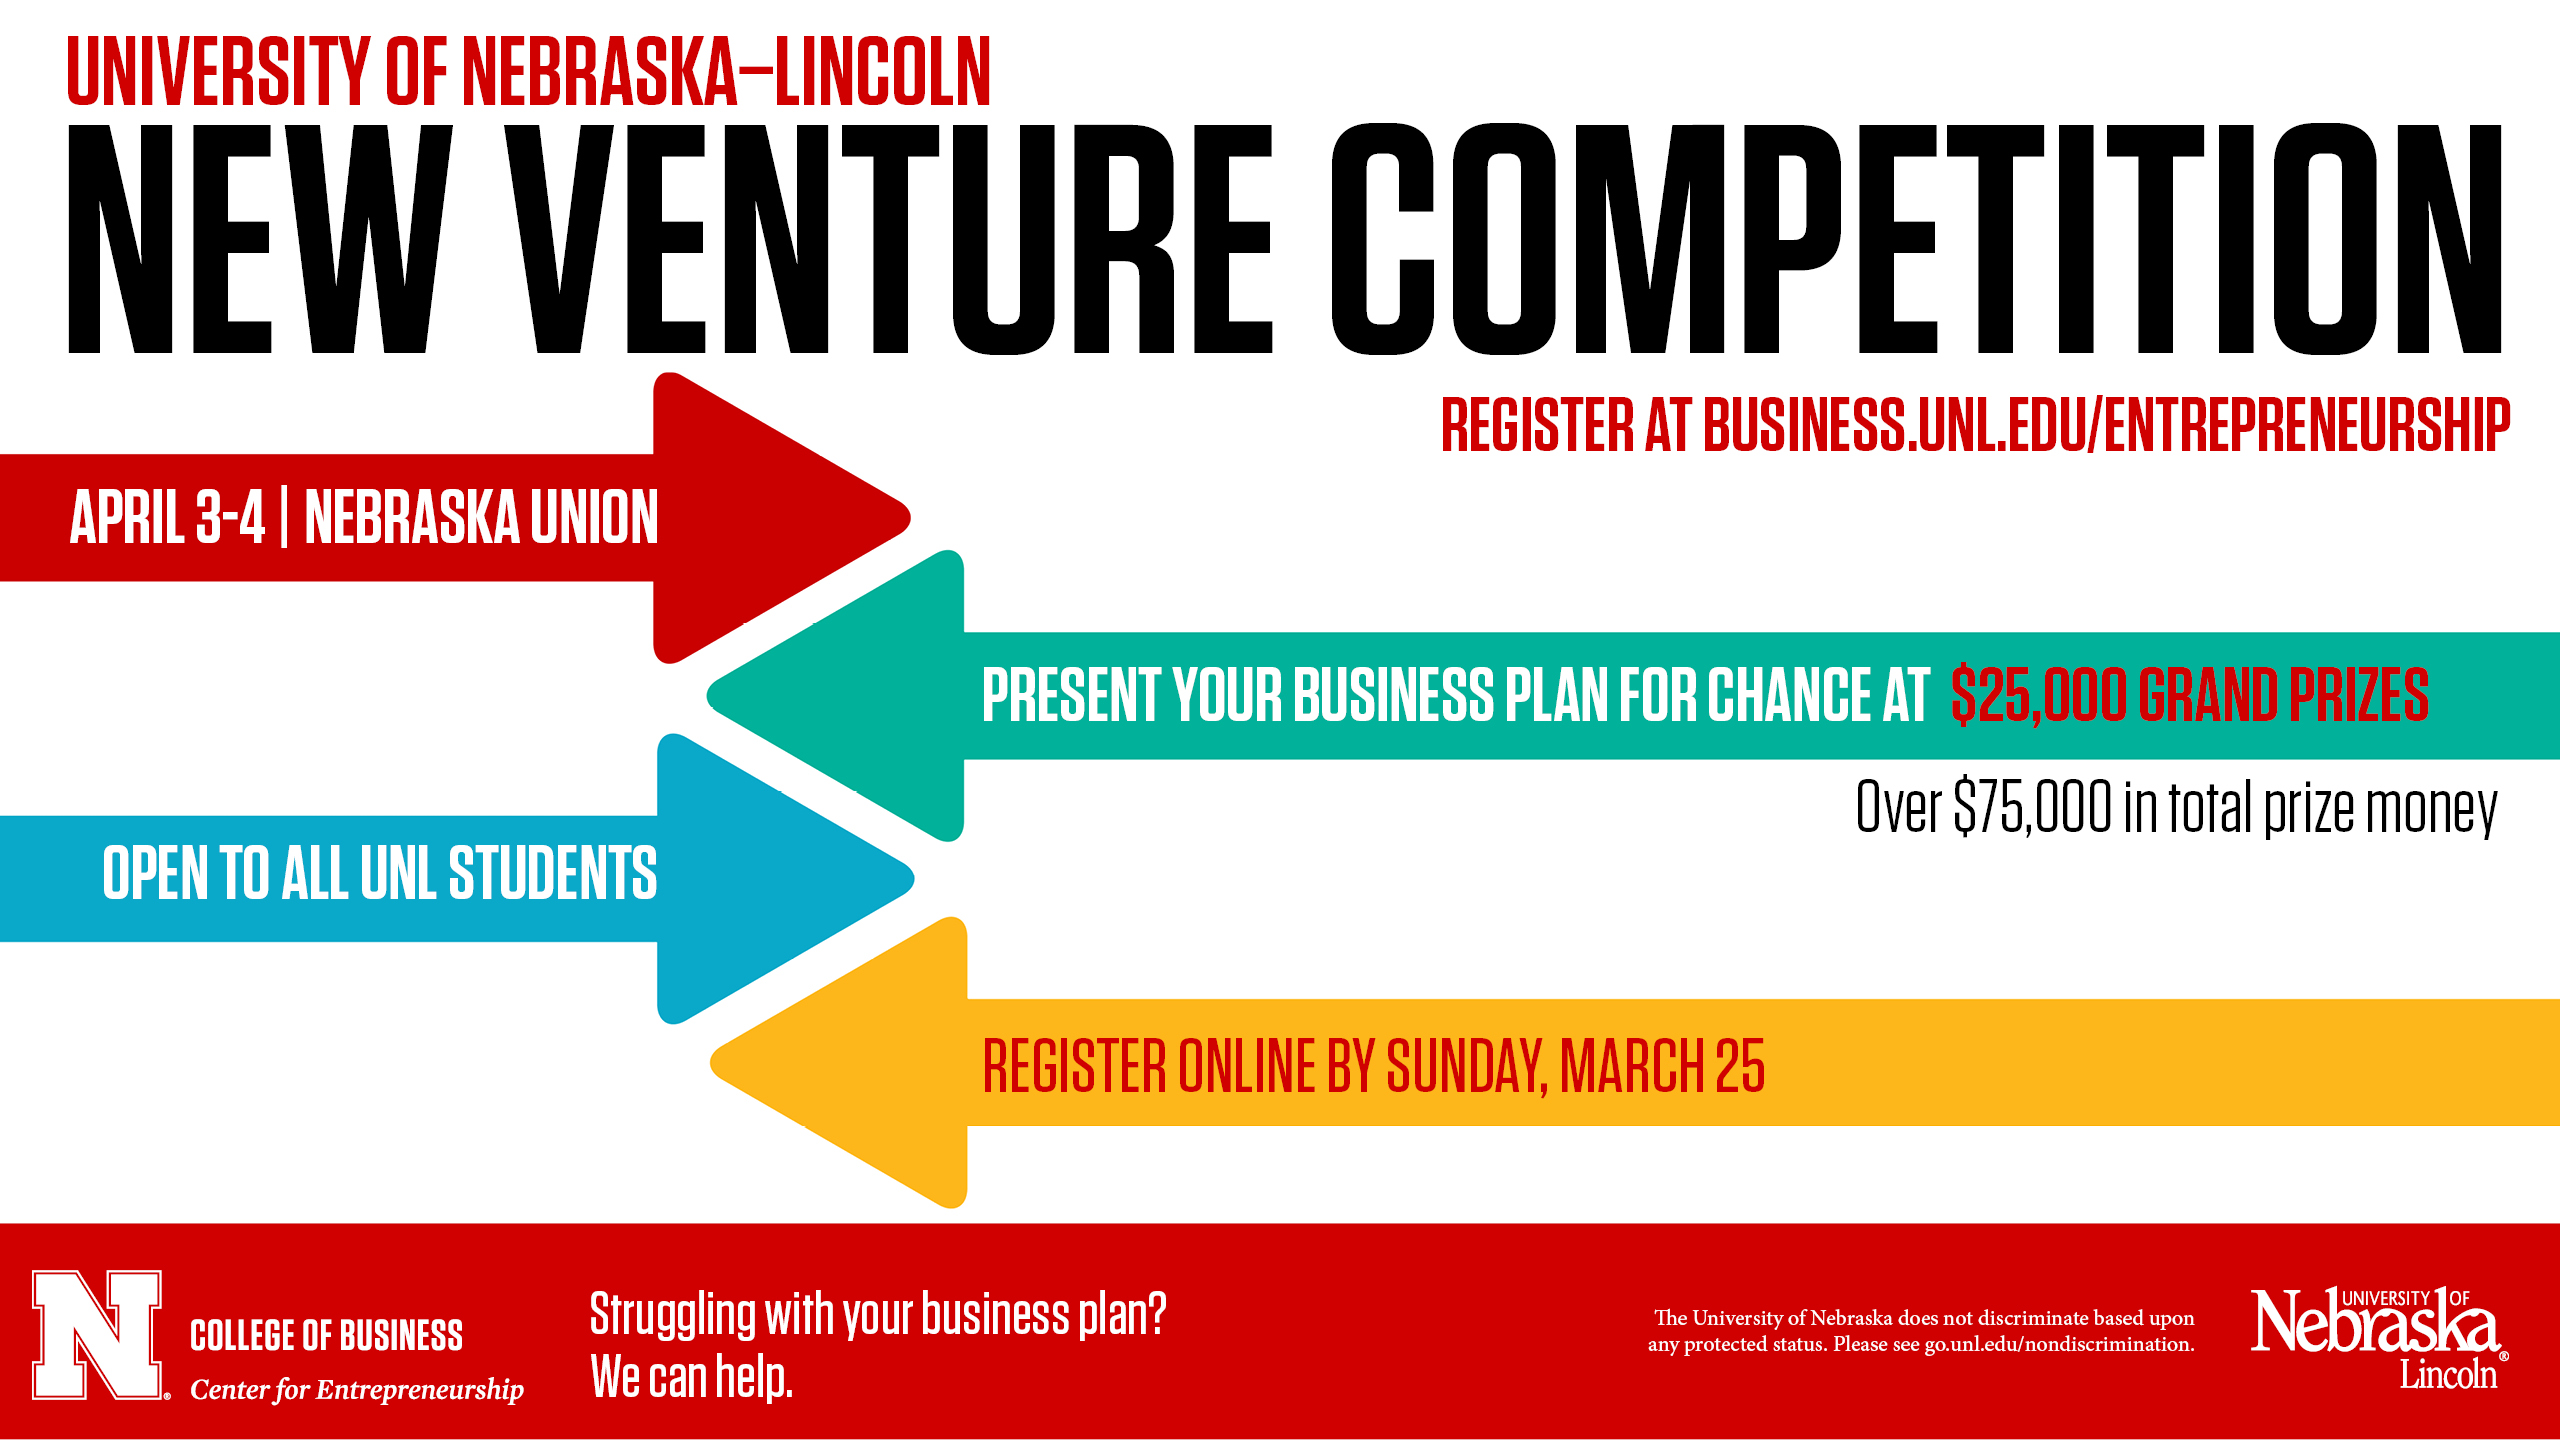 Present your business plan for a chance at $25,000. 